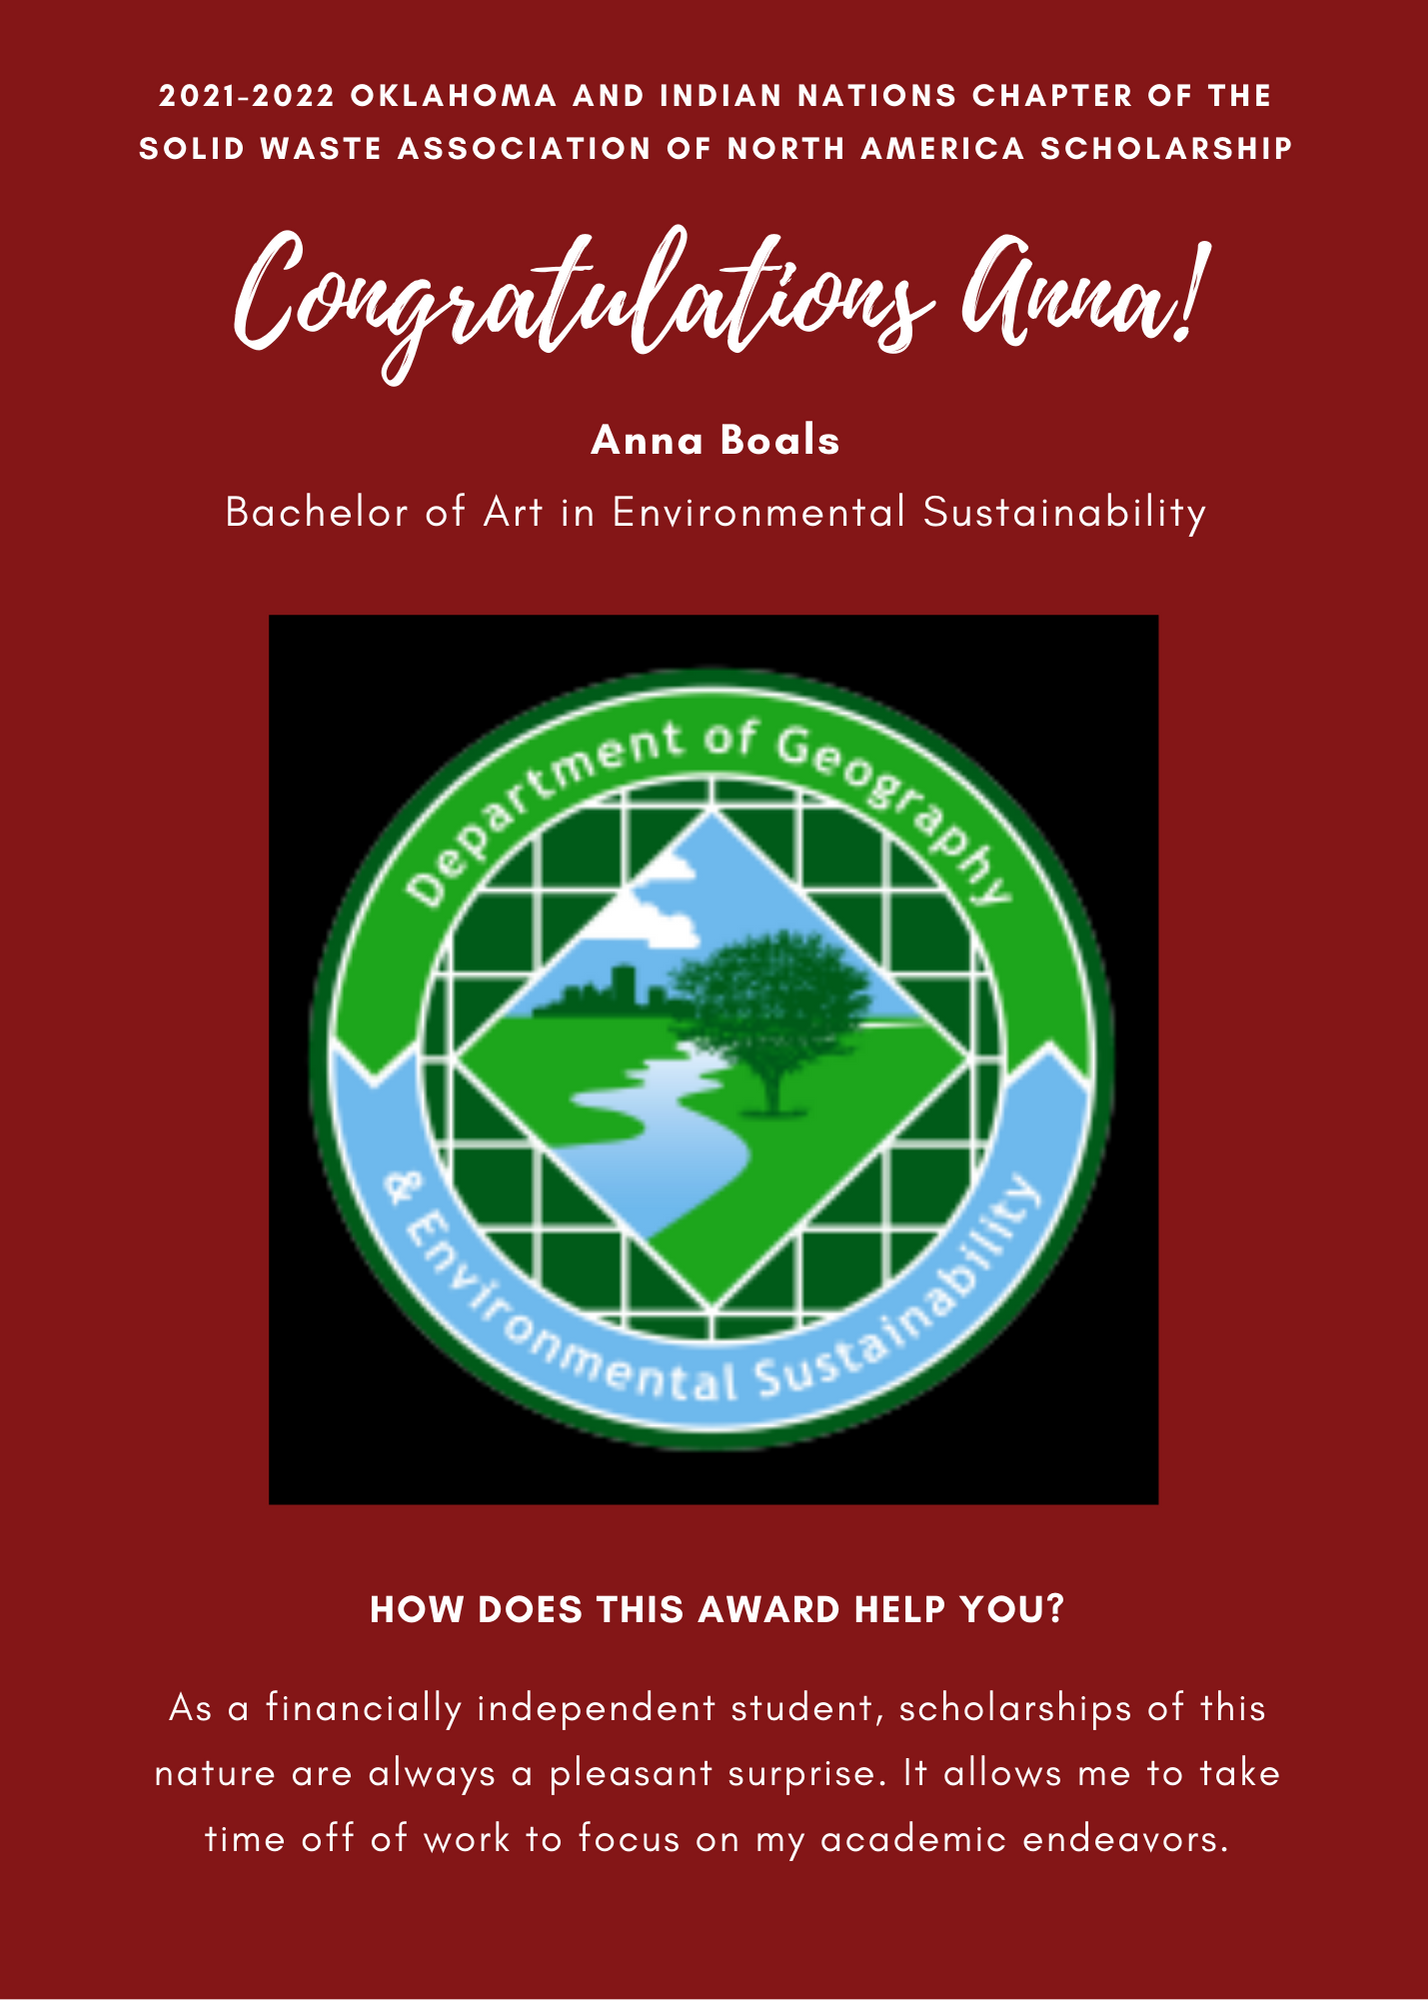 A&GS 21-22 Solid Waste Association of North America Scholarship Congratulations Anna! Aditi Anna Boals Bachelor of Art in Environmental Sustainability. How does this award help you? As a financially independent student, scholarships of this nature are always a pleasant suprive. it allows me to take time off of work to focus on my academic endeavors.